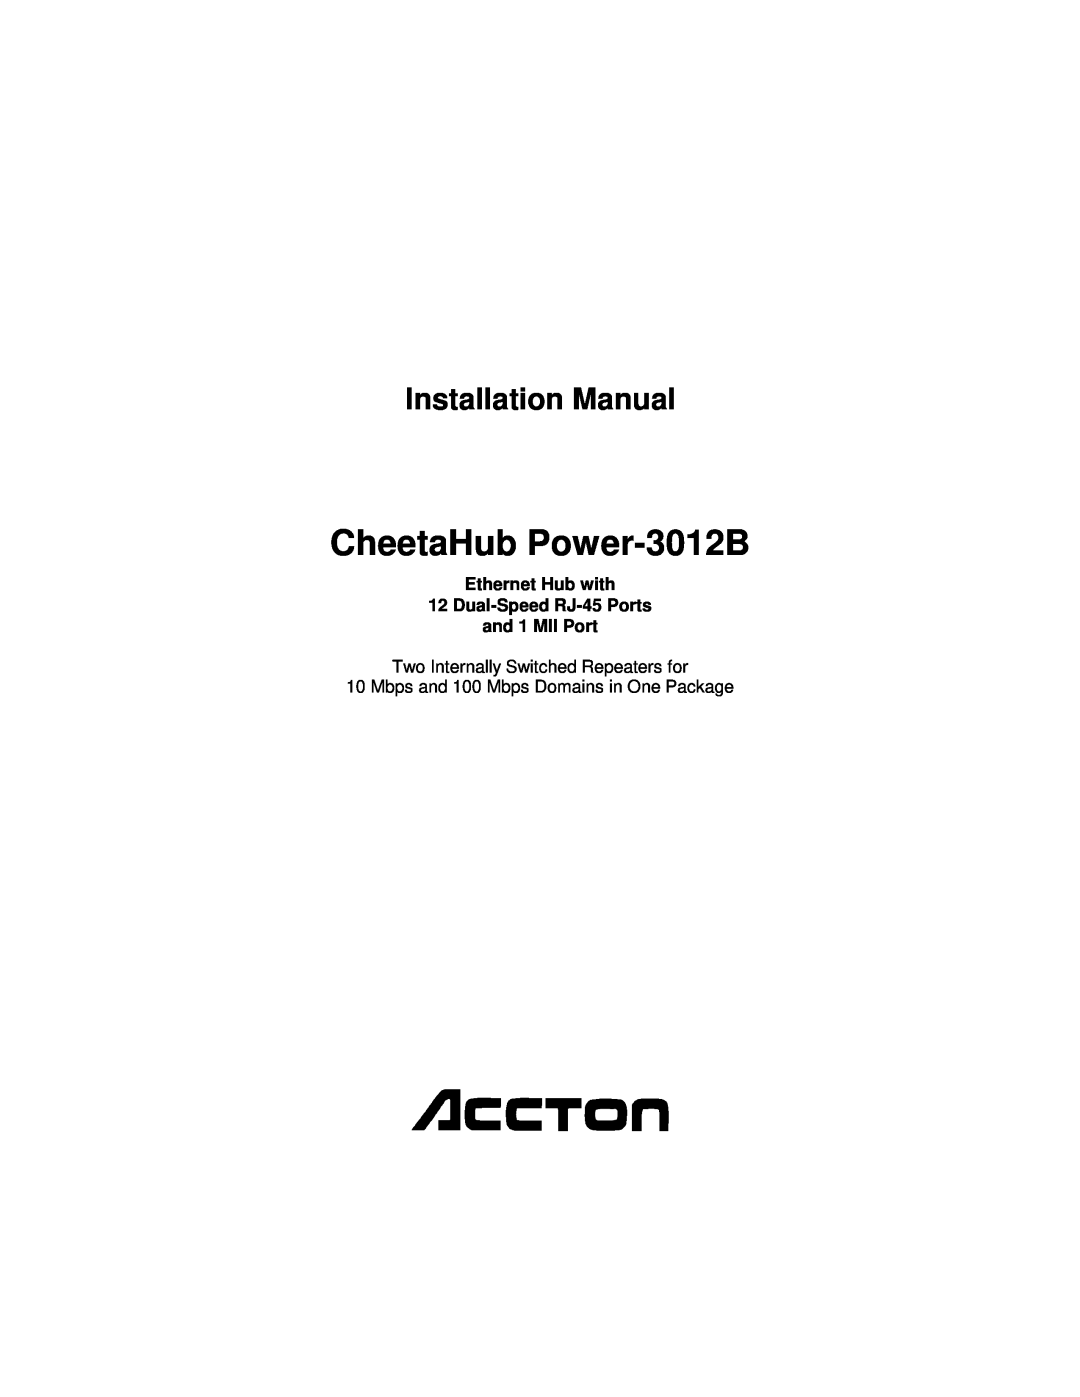 Accton Technology manual CheetaHub Power-3012B, Installation Manual, Two Internally Switched Repeaters for 